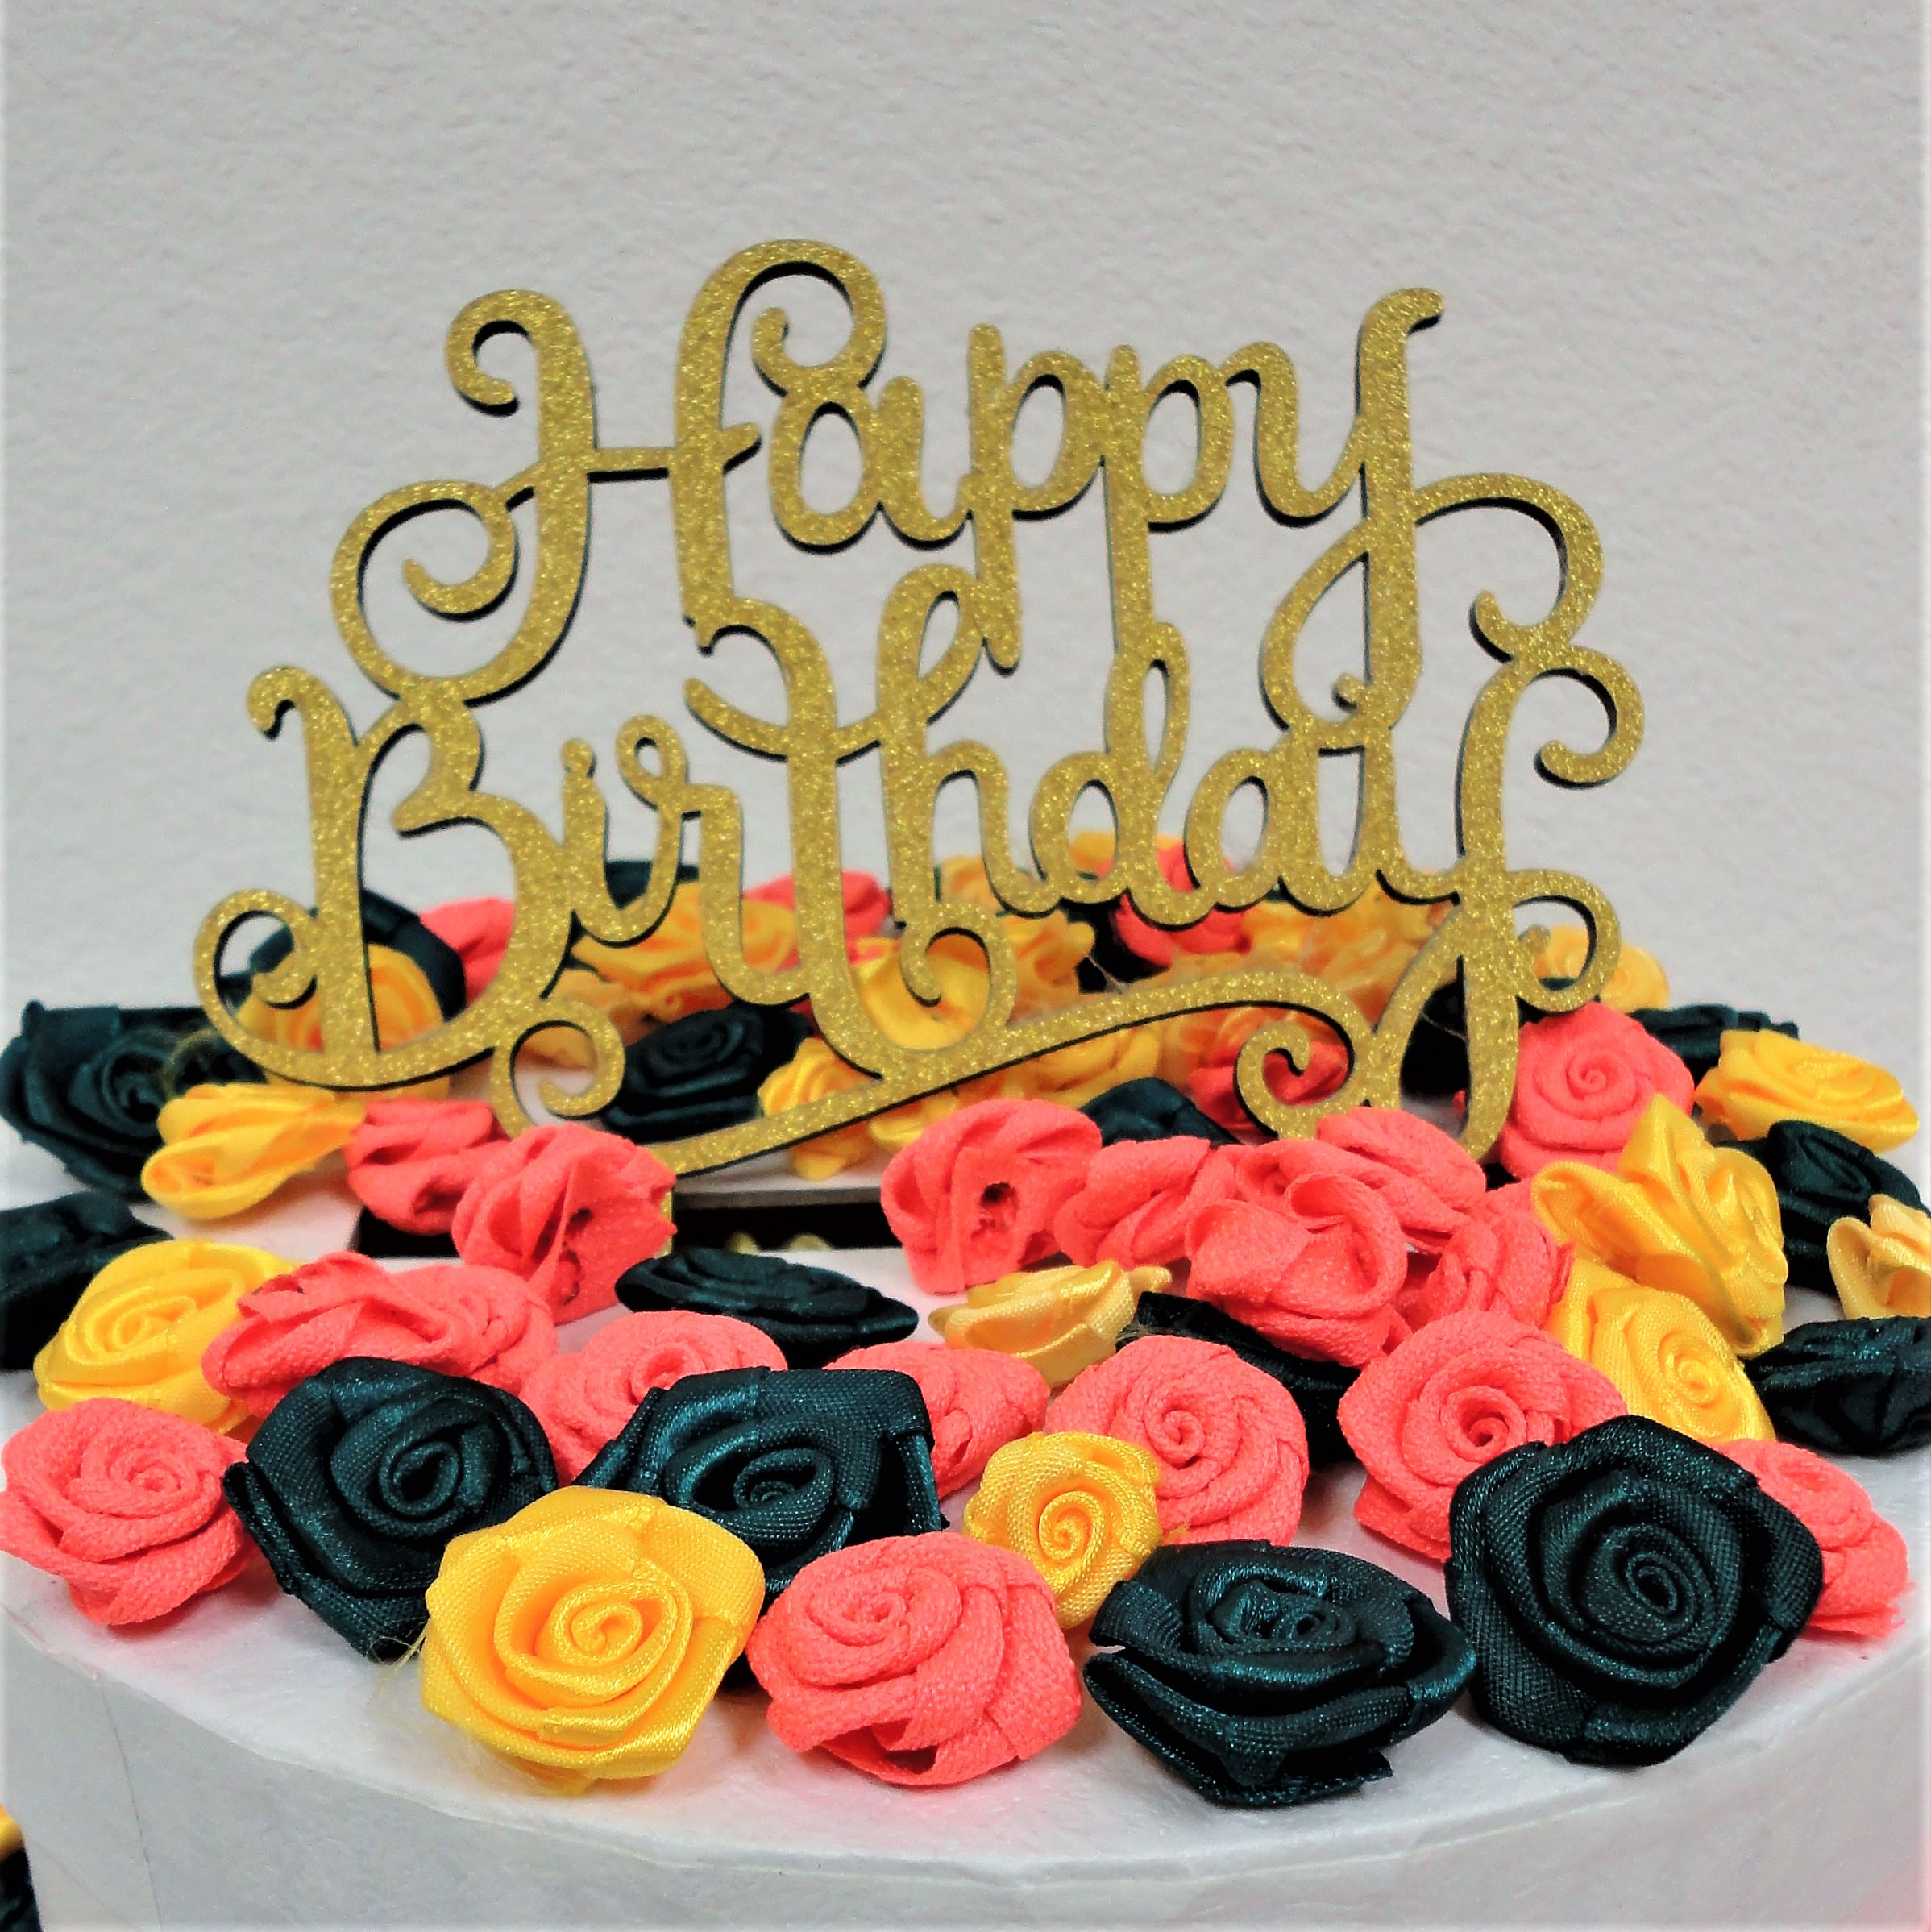 Red 6 Large Edible Glittered Roses Flower Cake Topper Decorations